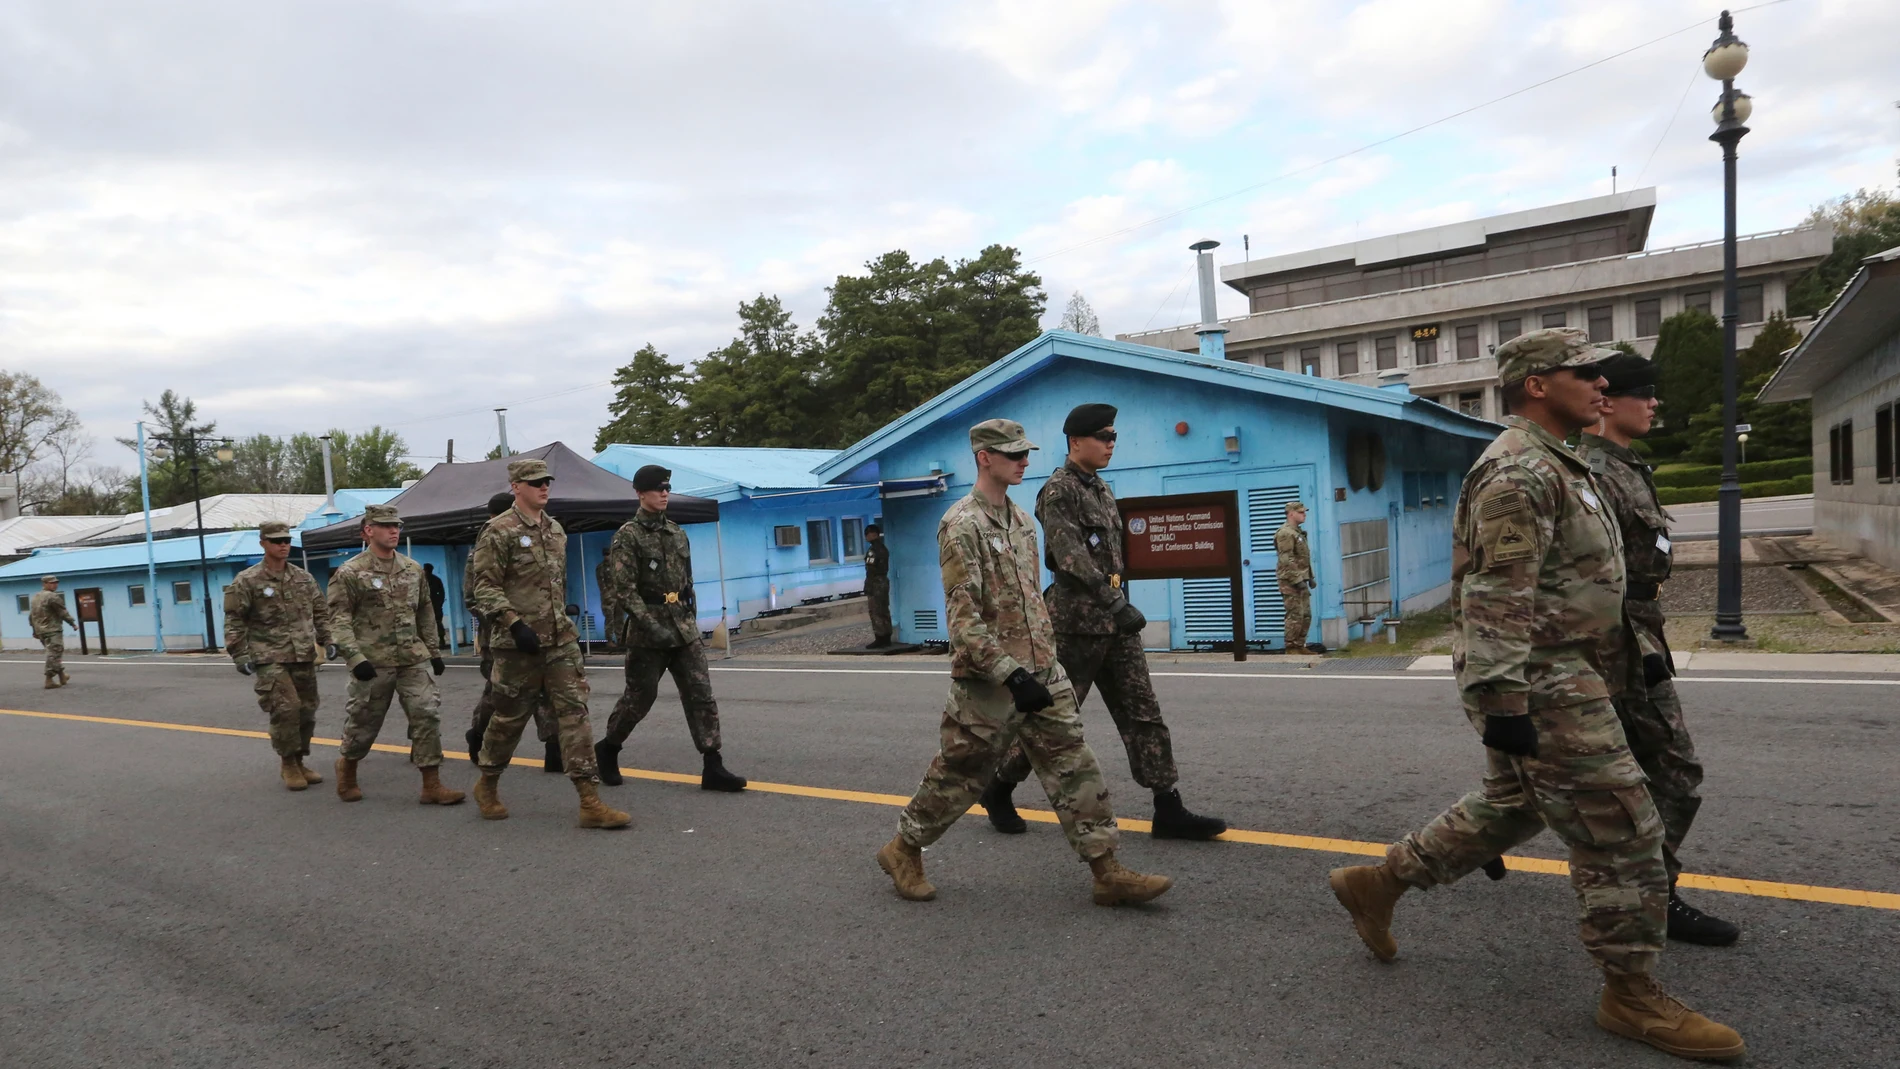 FILE - South Korean and U.S. Army soldiers, wearing grey uniforms, patrol during a rehearsal to mark the first anniversary of a summit between South Korean President Moon Jae-in and North Korean leader Kim Jong Un, at the border village of Panmunjom in the demilitarized zone (DMZ) between the two Koreas in Paju, South Korea on April 26, 2019. An American has crossed the heavily fortified border from South Korea into North Korea, the American-led U.N. Command overseeing the area said Tuesday, ...